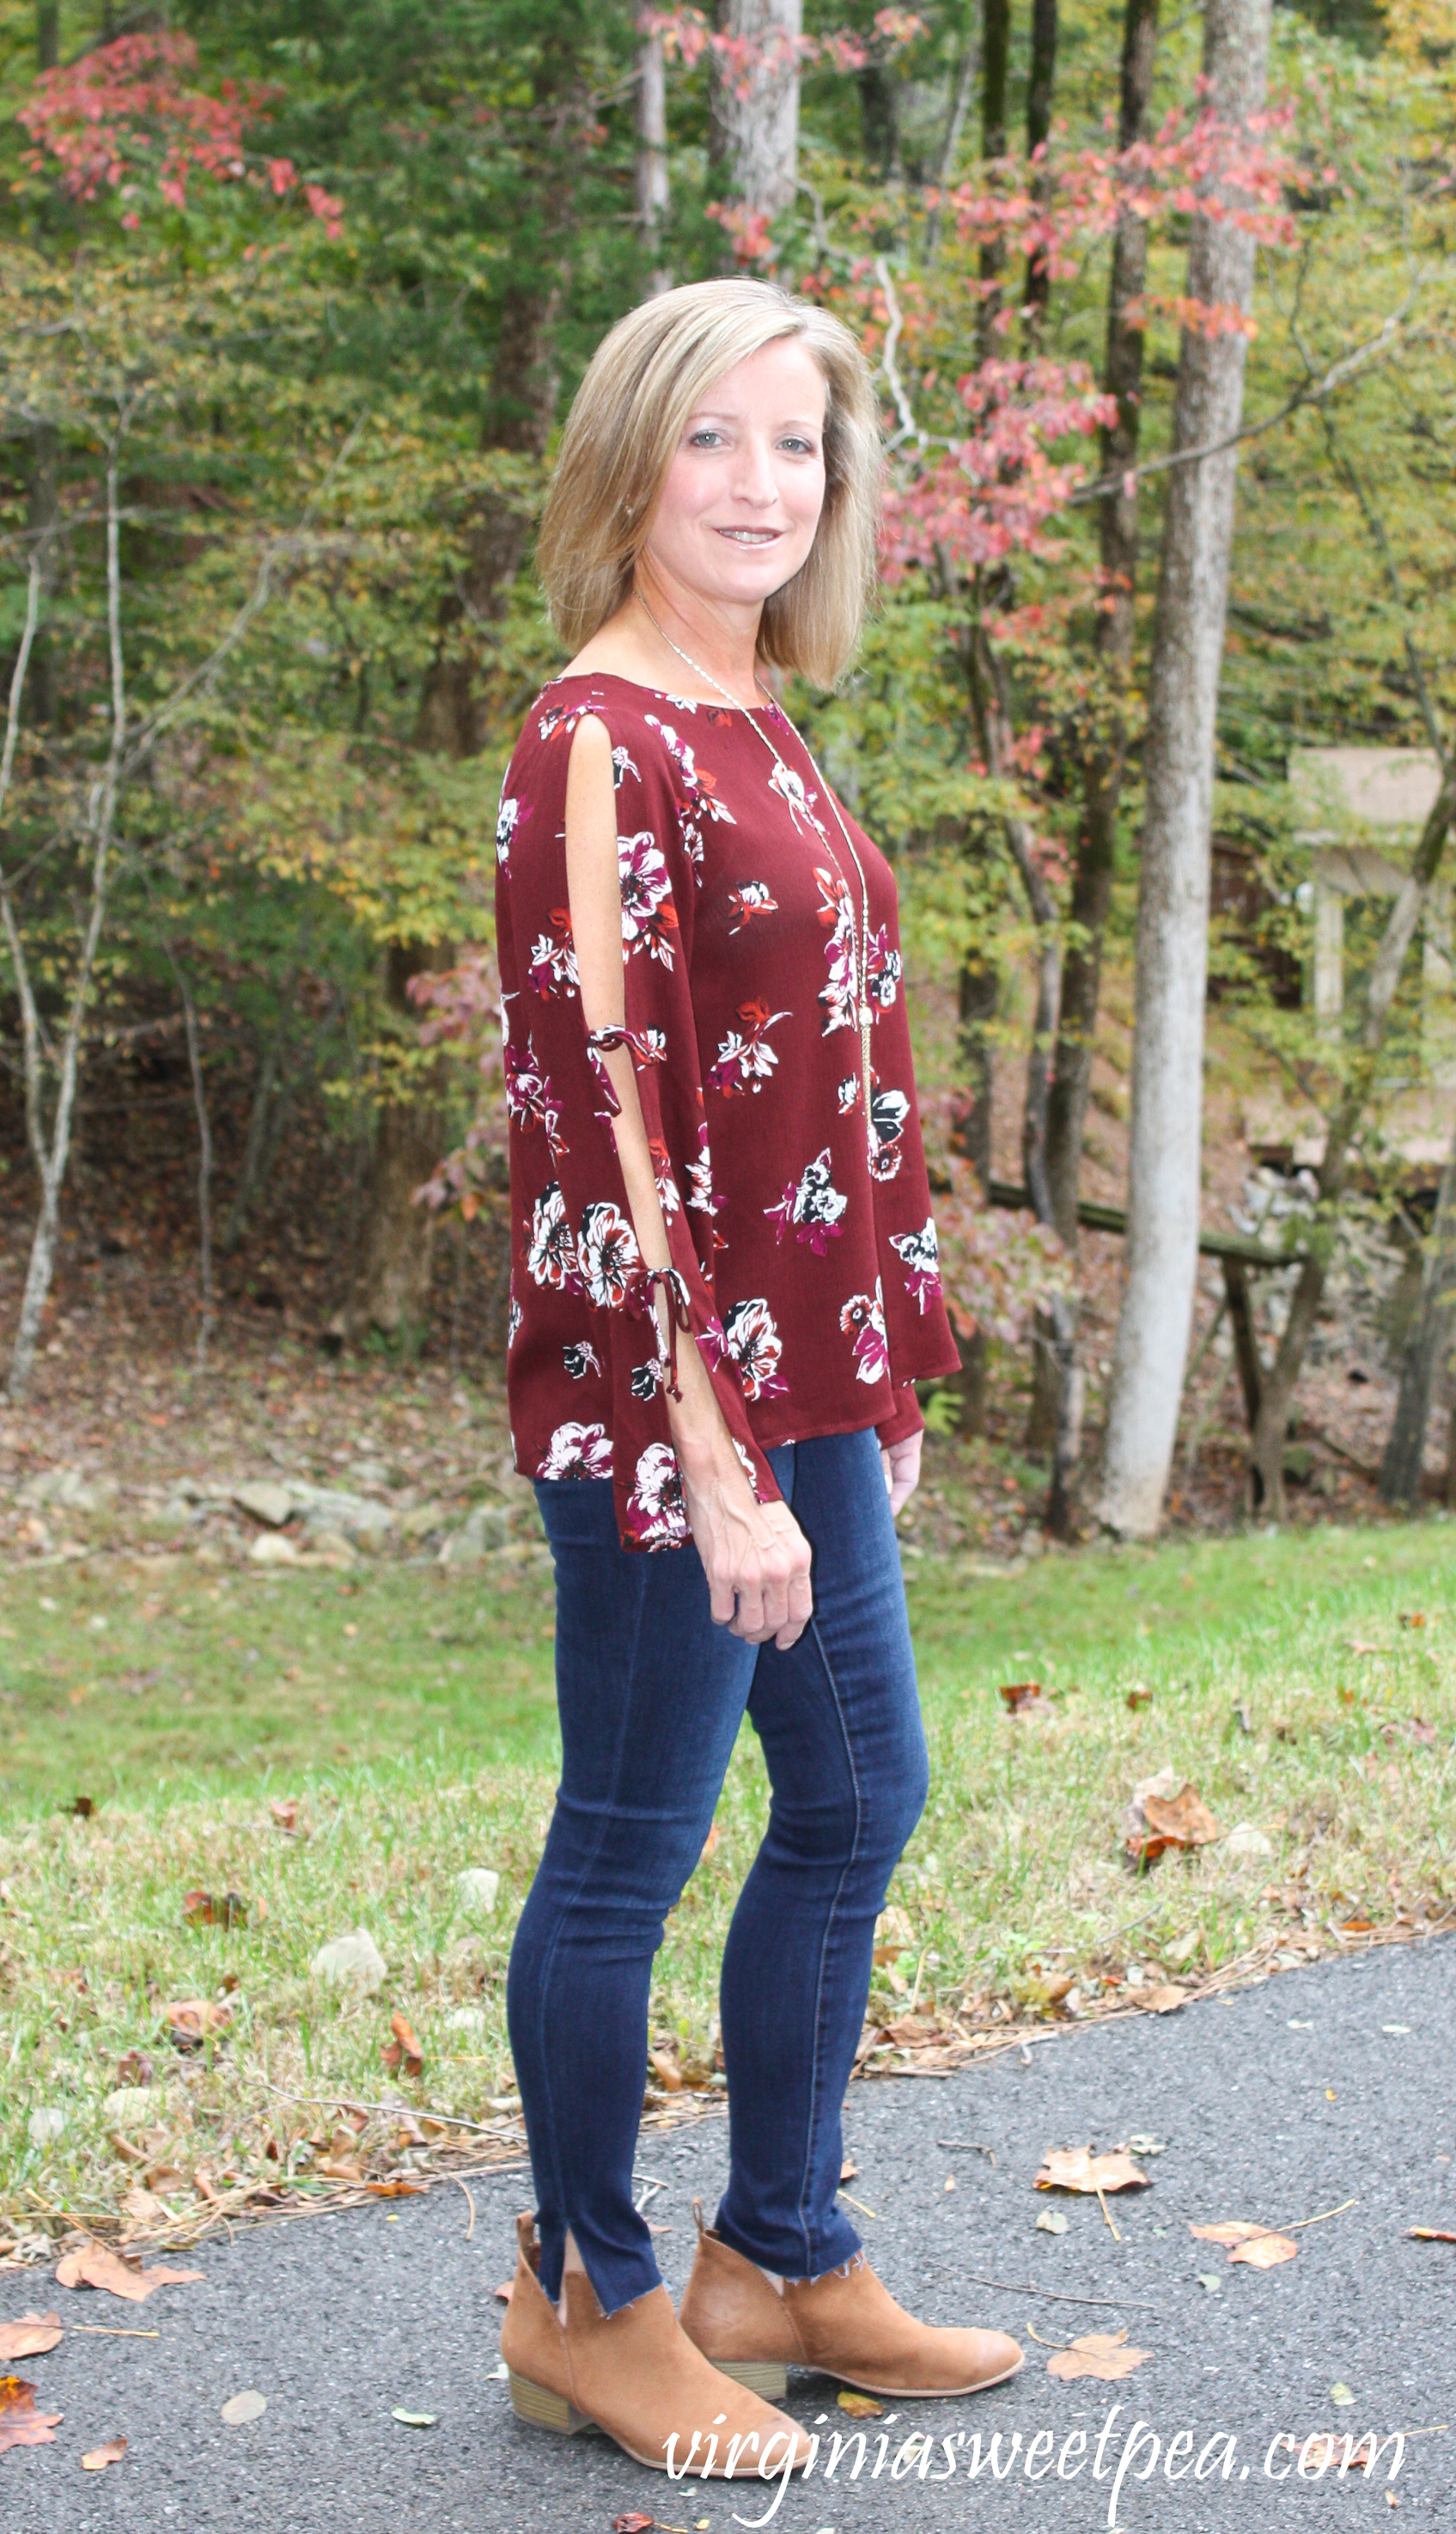 Stitch Fix Review for November 2018 - Kaileigh Rosella Cold Shoulder Top with Sam Edelman the Kitten Mid Rise Ankle Scissor Hem Skinny Jean #stitchfix #stitchfixreview #fallfashion #fashion #fashionover40